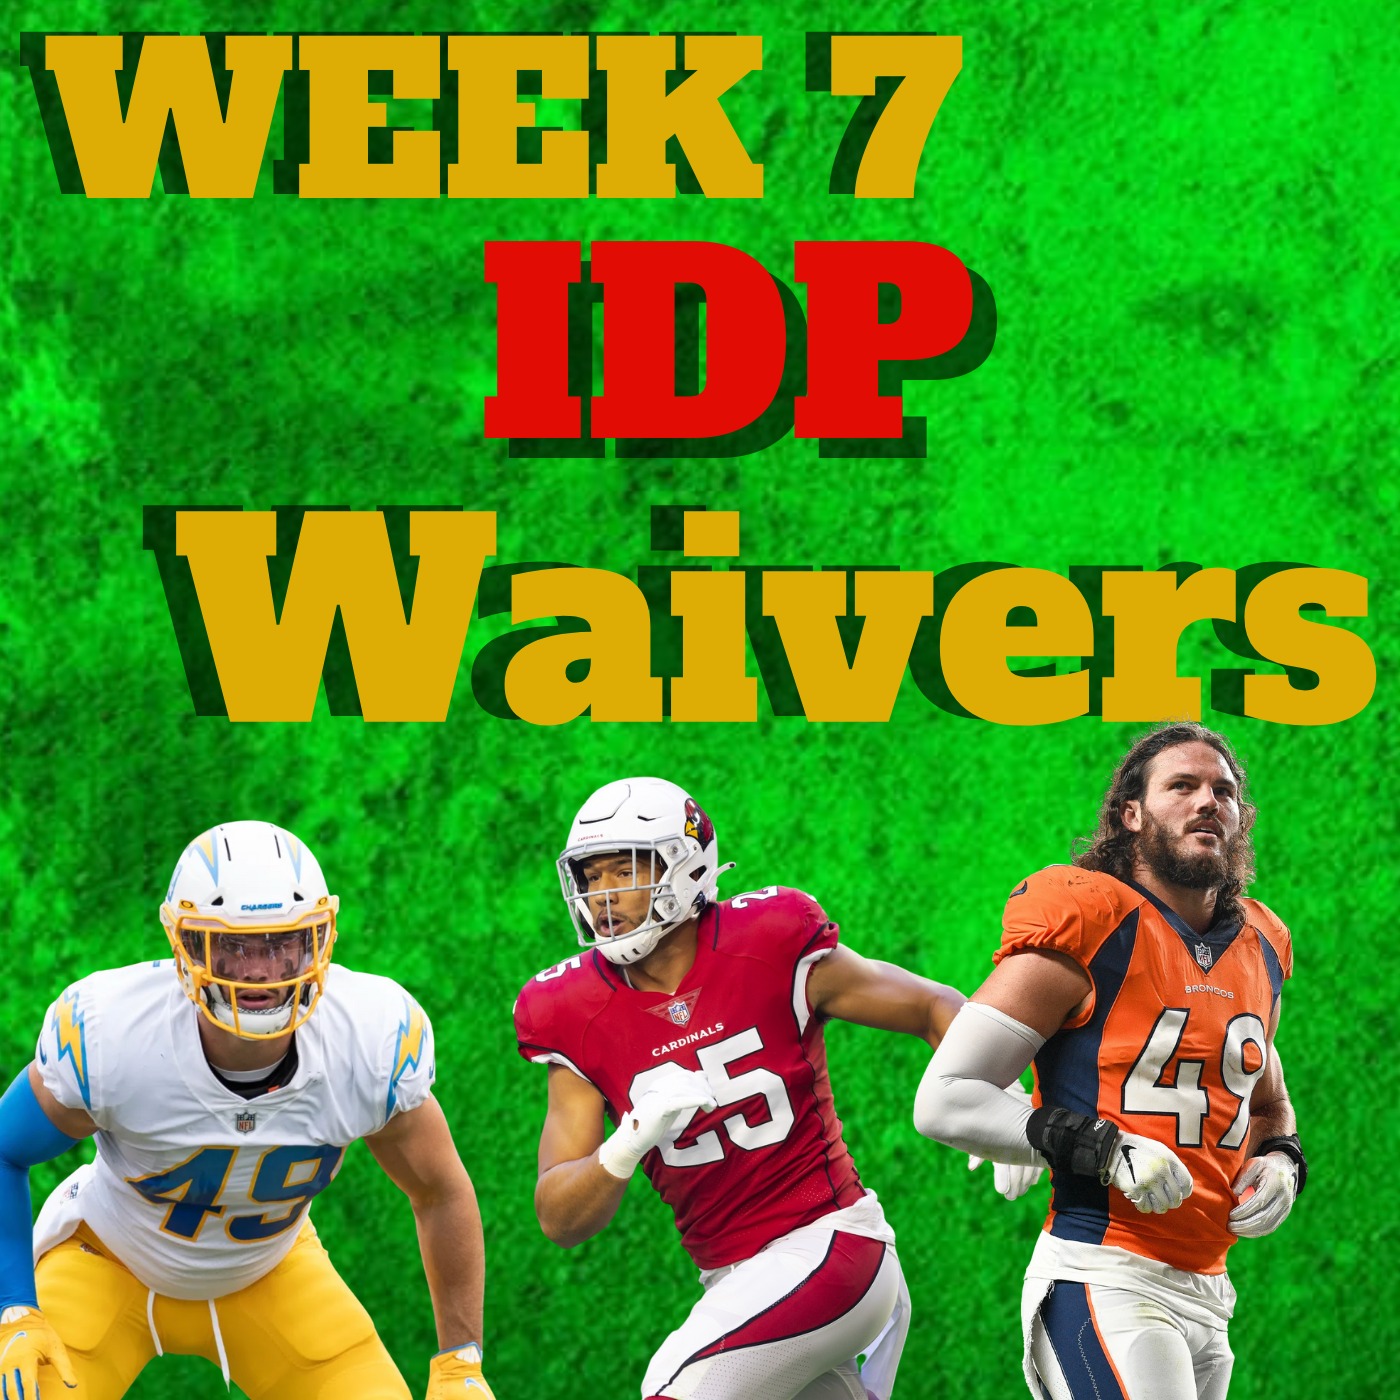 Week 7 IDP Waiver Wire Adds